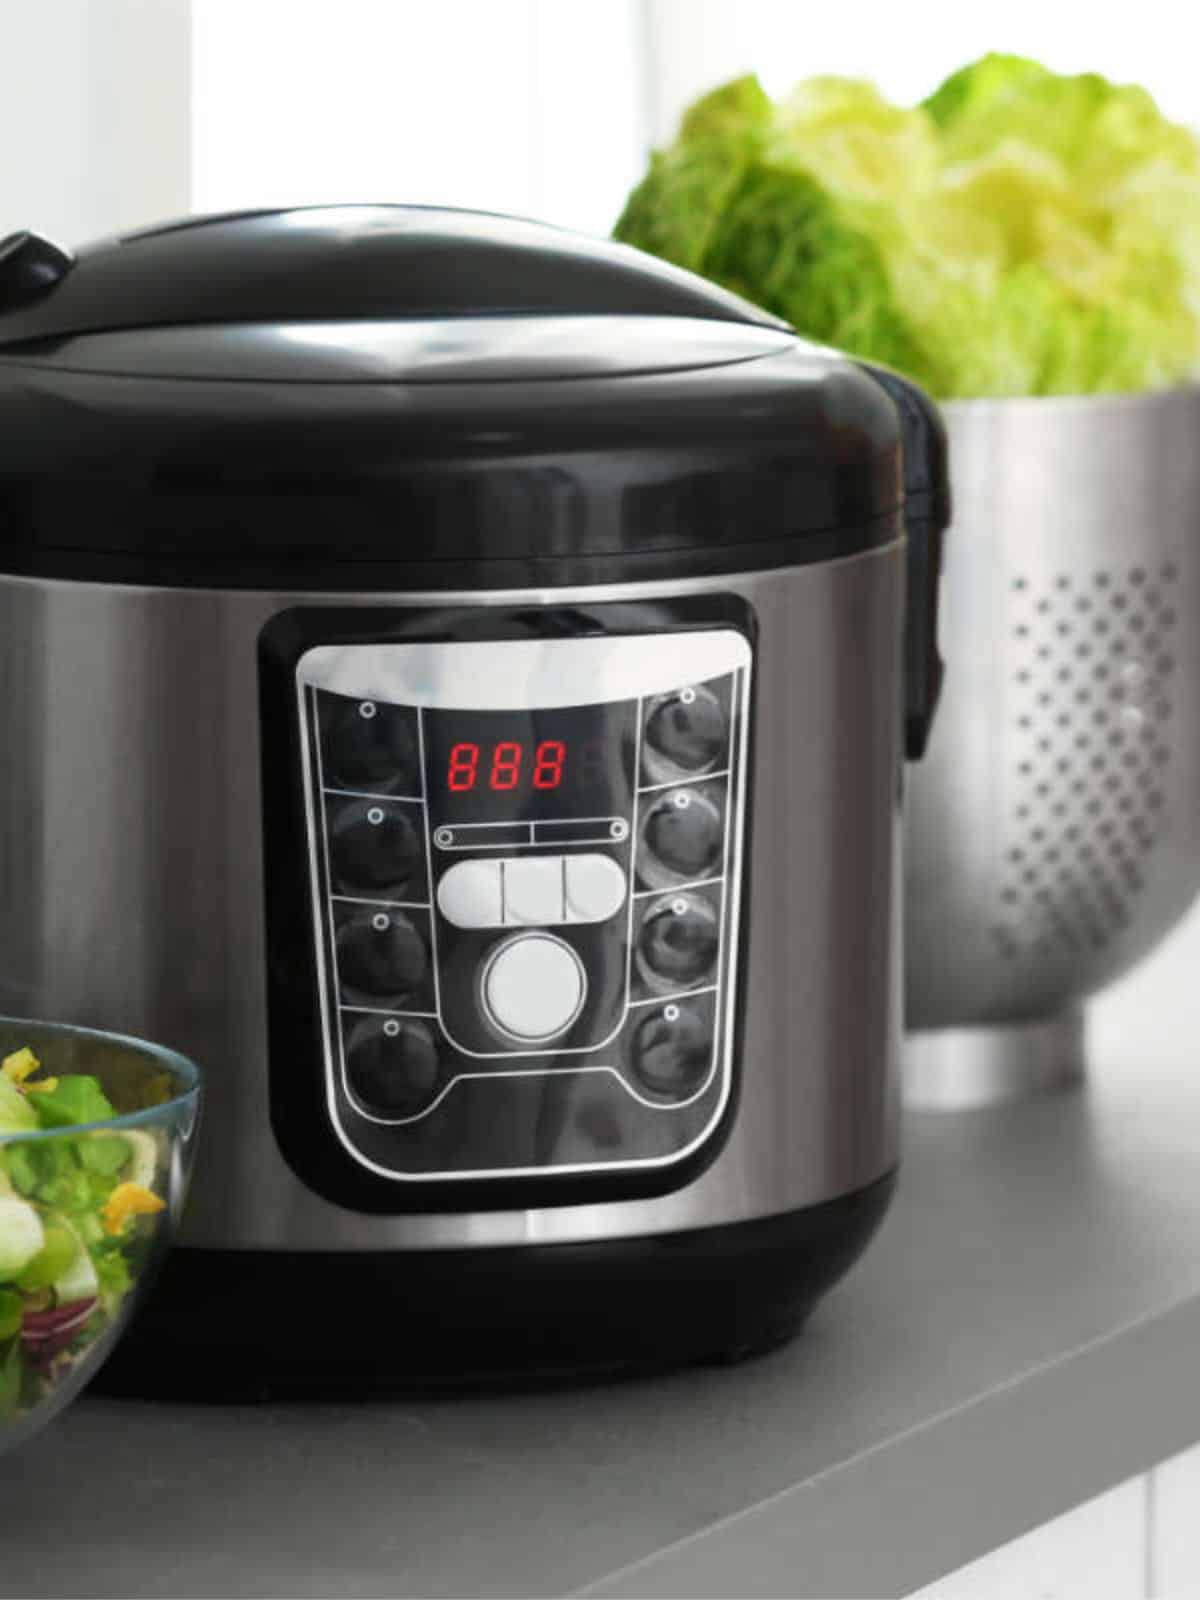 Modern electric Instant Pot multi cooker and food on kitchen countertop.